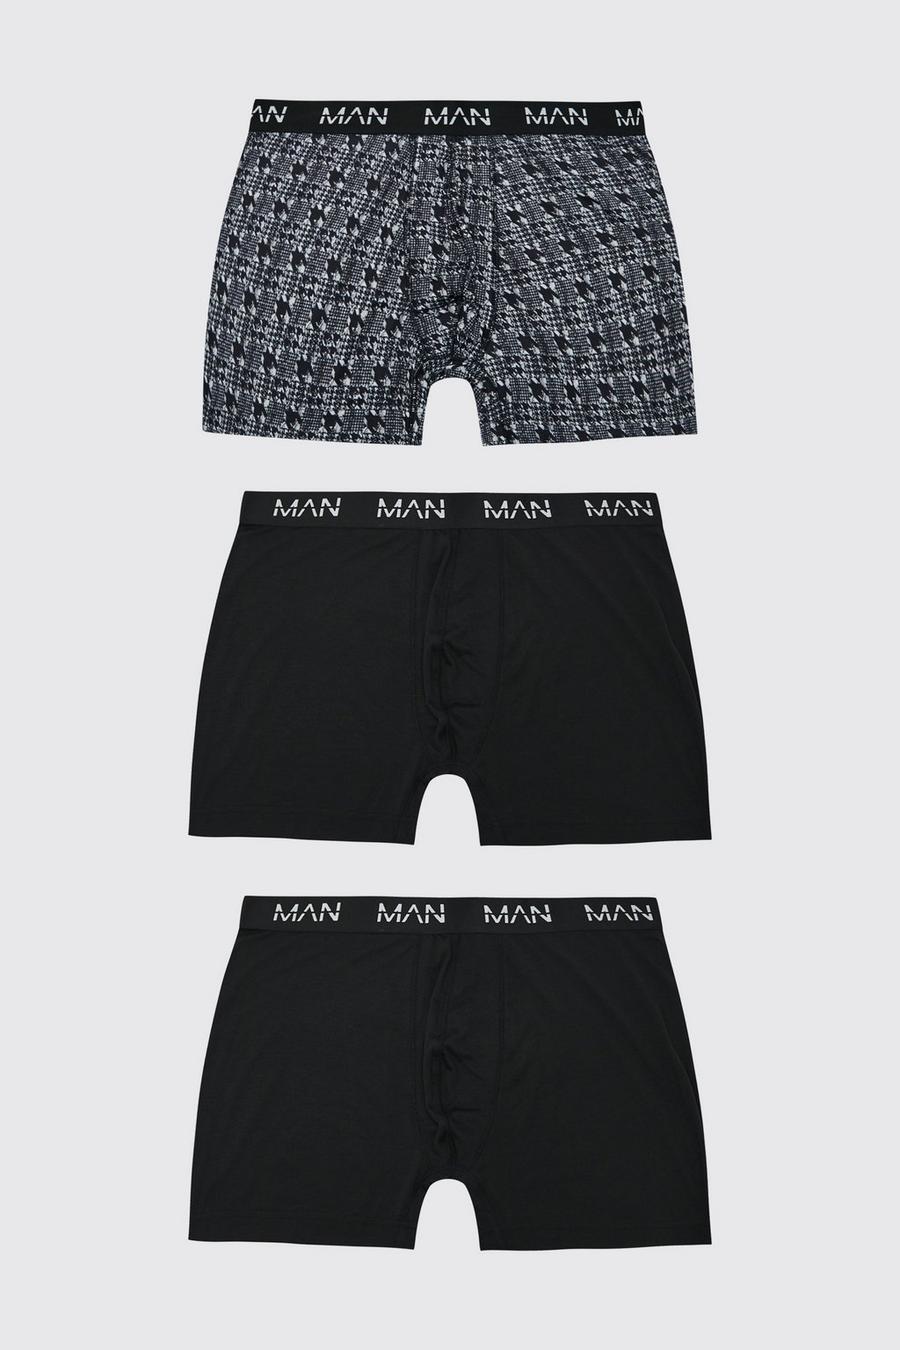 Multi Plus Dogtooth Monochrome Print 3 Pack Boxer image number 1